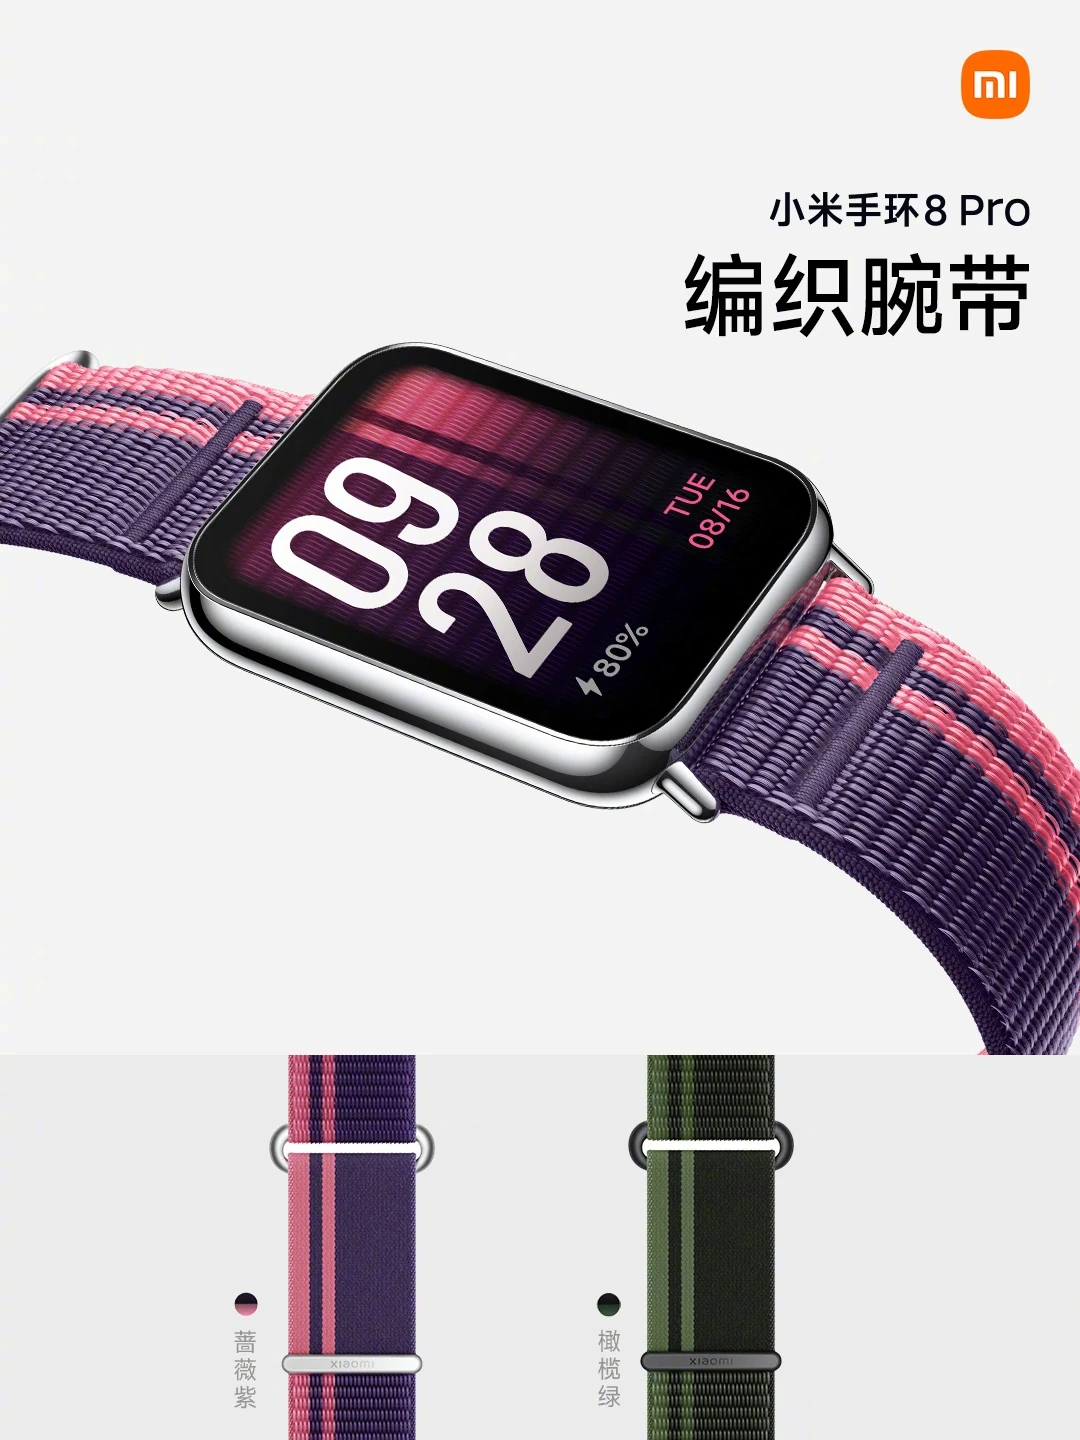 Xiaomi Smart Band 8 Pro: Display specs and features revealed